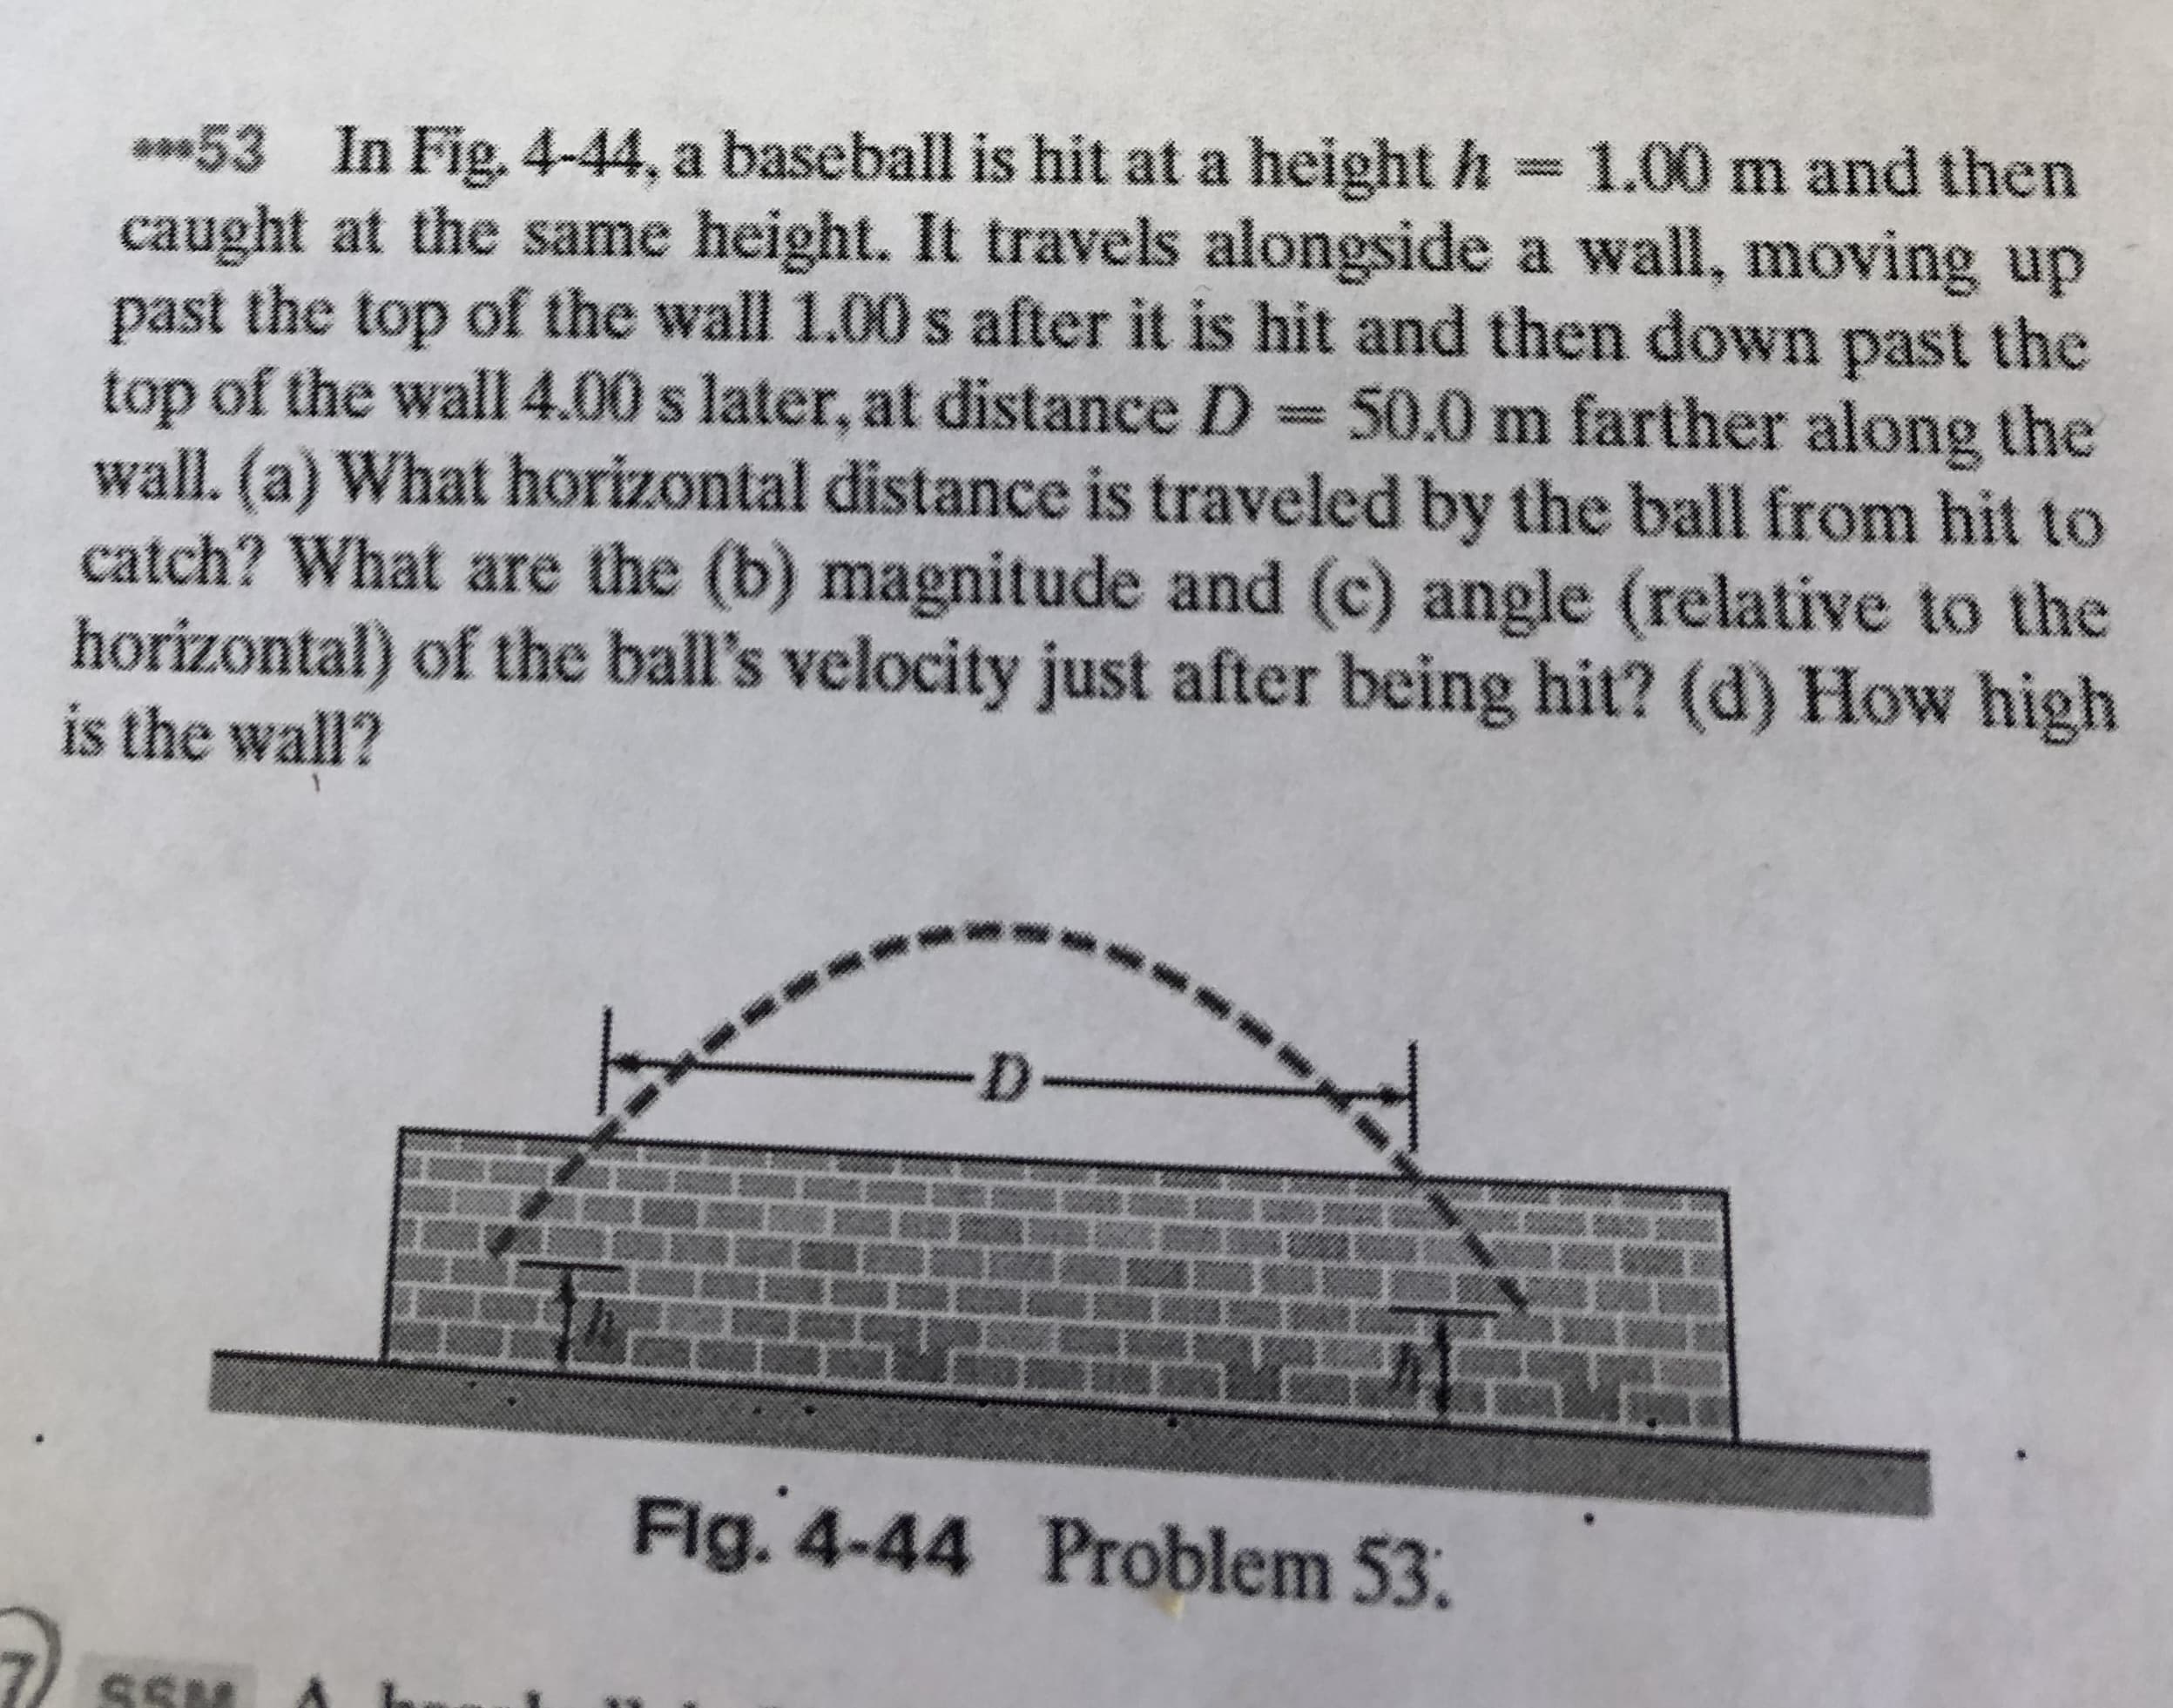 **53 In Fig. 4-44, a baseball is hit at a height h = 1.00 m and then
caught at the same height. It travels alongside a wall, moving up
past the top of the wall 1.00 s after it is hit and then down past the
top of the wall 4.00 s later, at distance D =50.0 m farther along the
wall. (a) What horizontal distance is traveled by the ball from hit to
catch? What are the (b) magnitude and (c) angle (relative to the
horizontal) of the ball's velocity just after being hit? (d) How high
is the wall?
www.
D-
Fig. 4-44 Problem 53.
SSN
